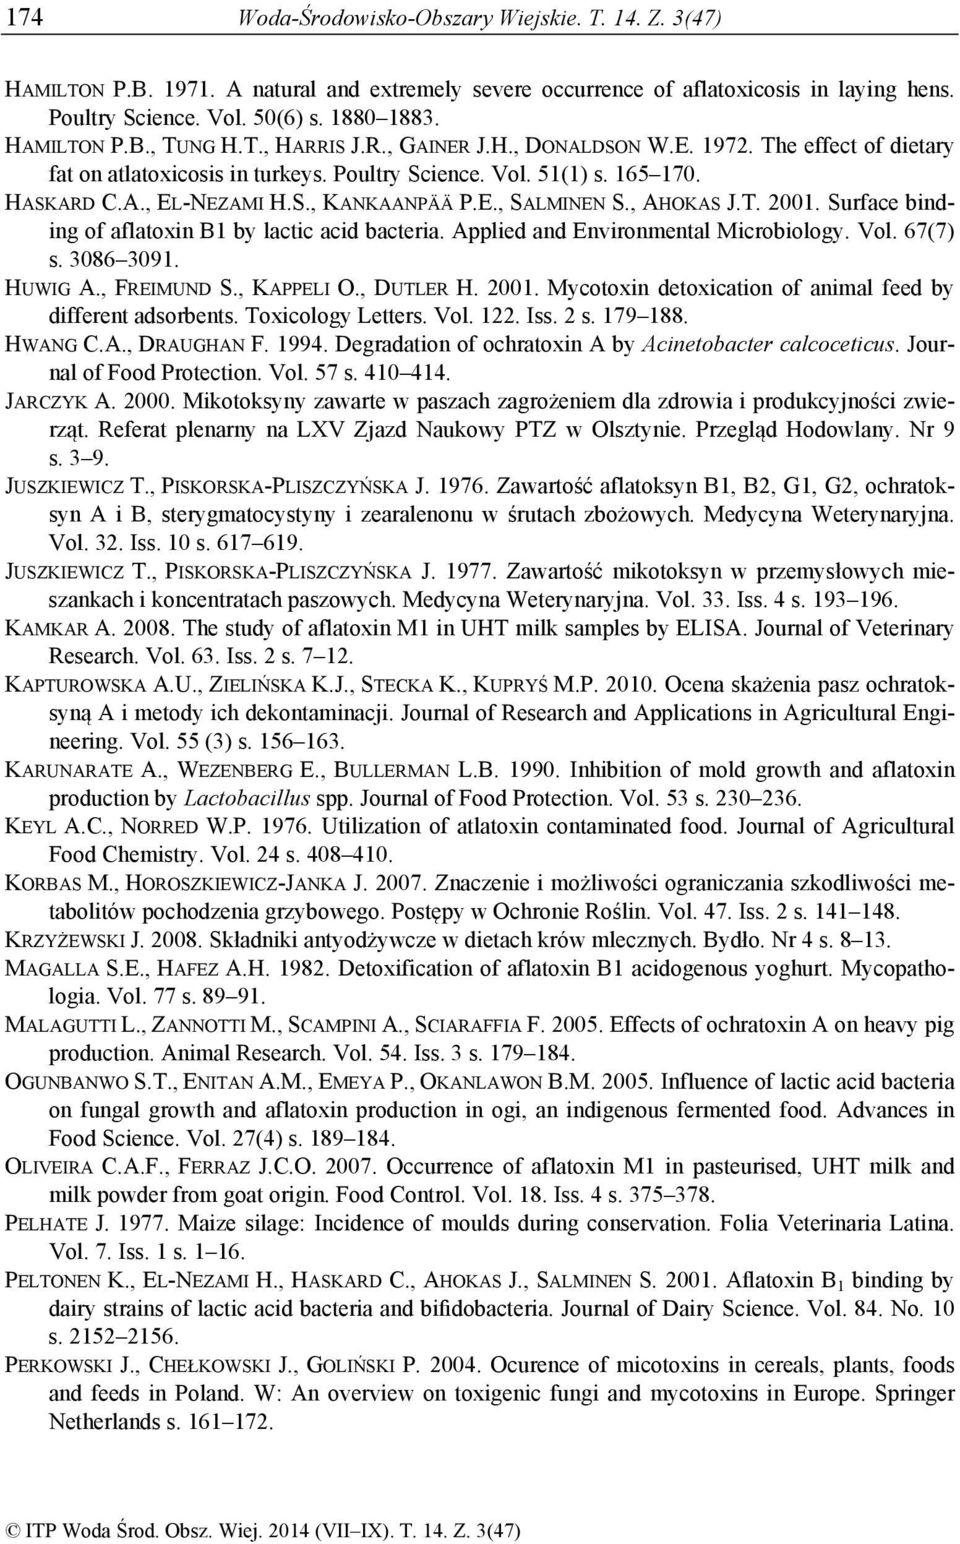 E., SALMINEN S., AHOKAS J.T. 2001. Surface binding of aflatoxin B1 by lactic acid bacteria. Applied and Environmental Microbiology. Vol. 67(7) s. 3086 3091. HUWIG A., FREIMUND S., KAPPELI O.